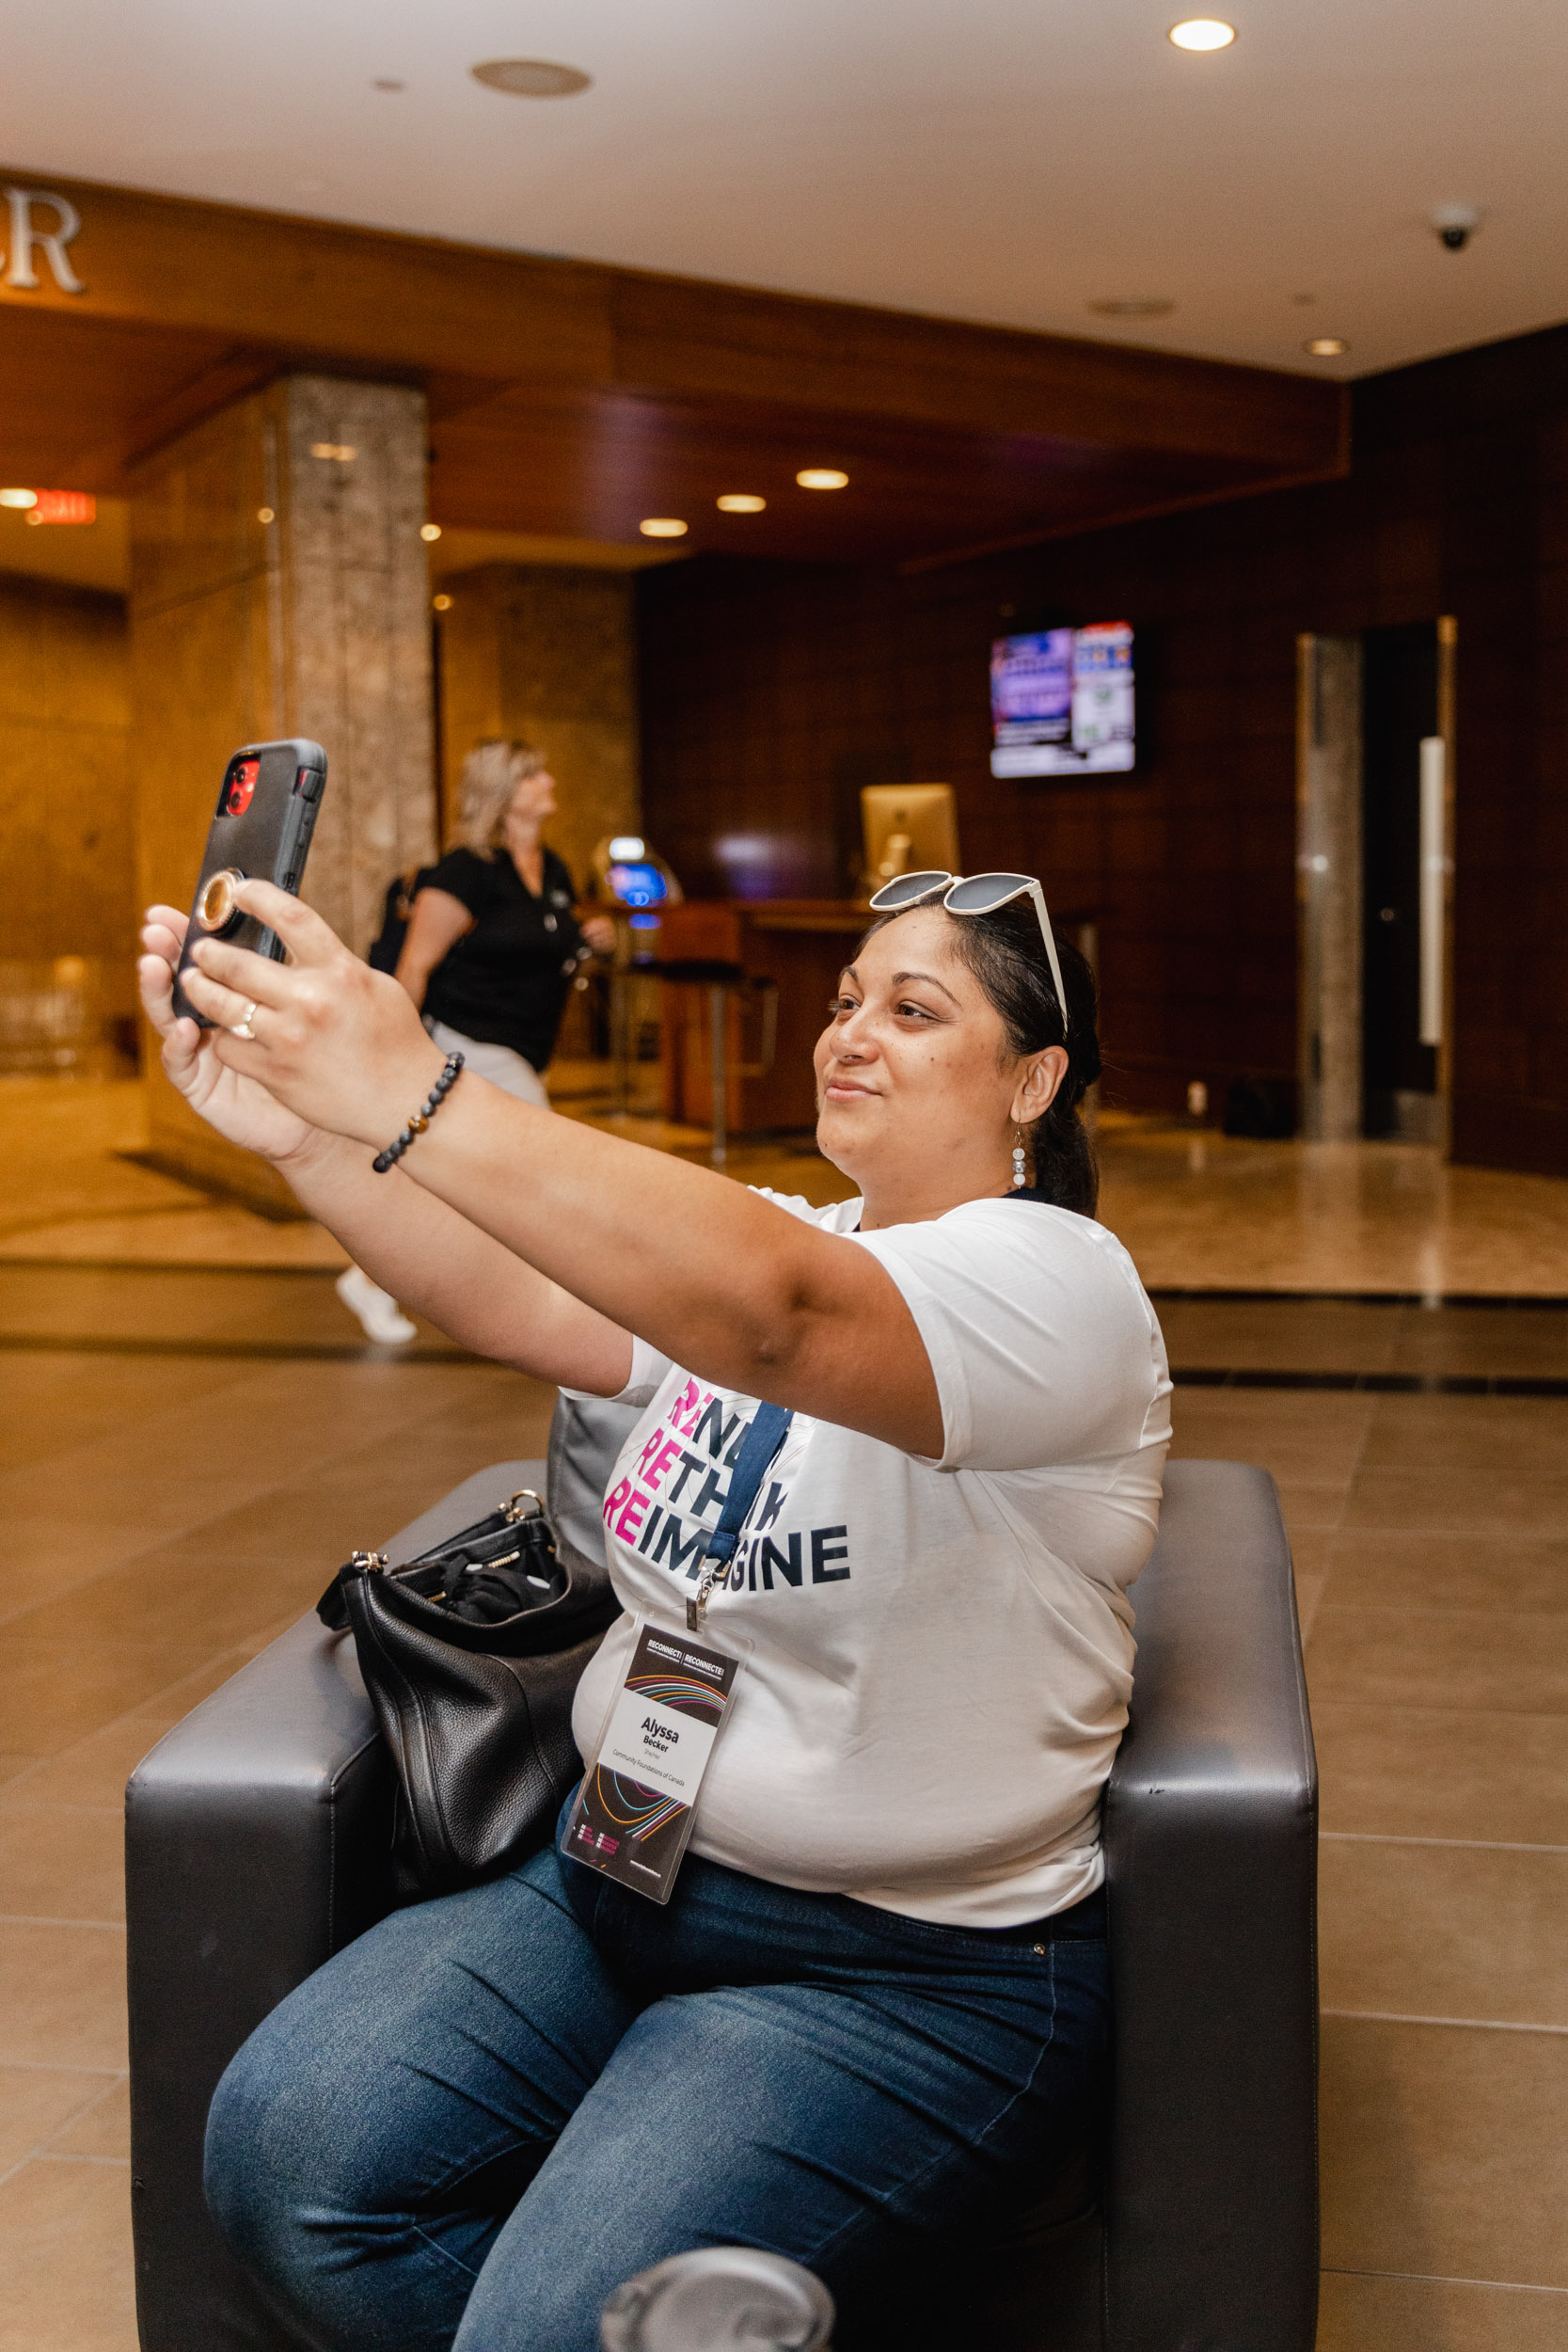 A woman capturing a conference moment with a selfie in a hotel lobby.